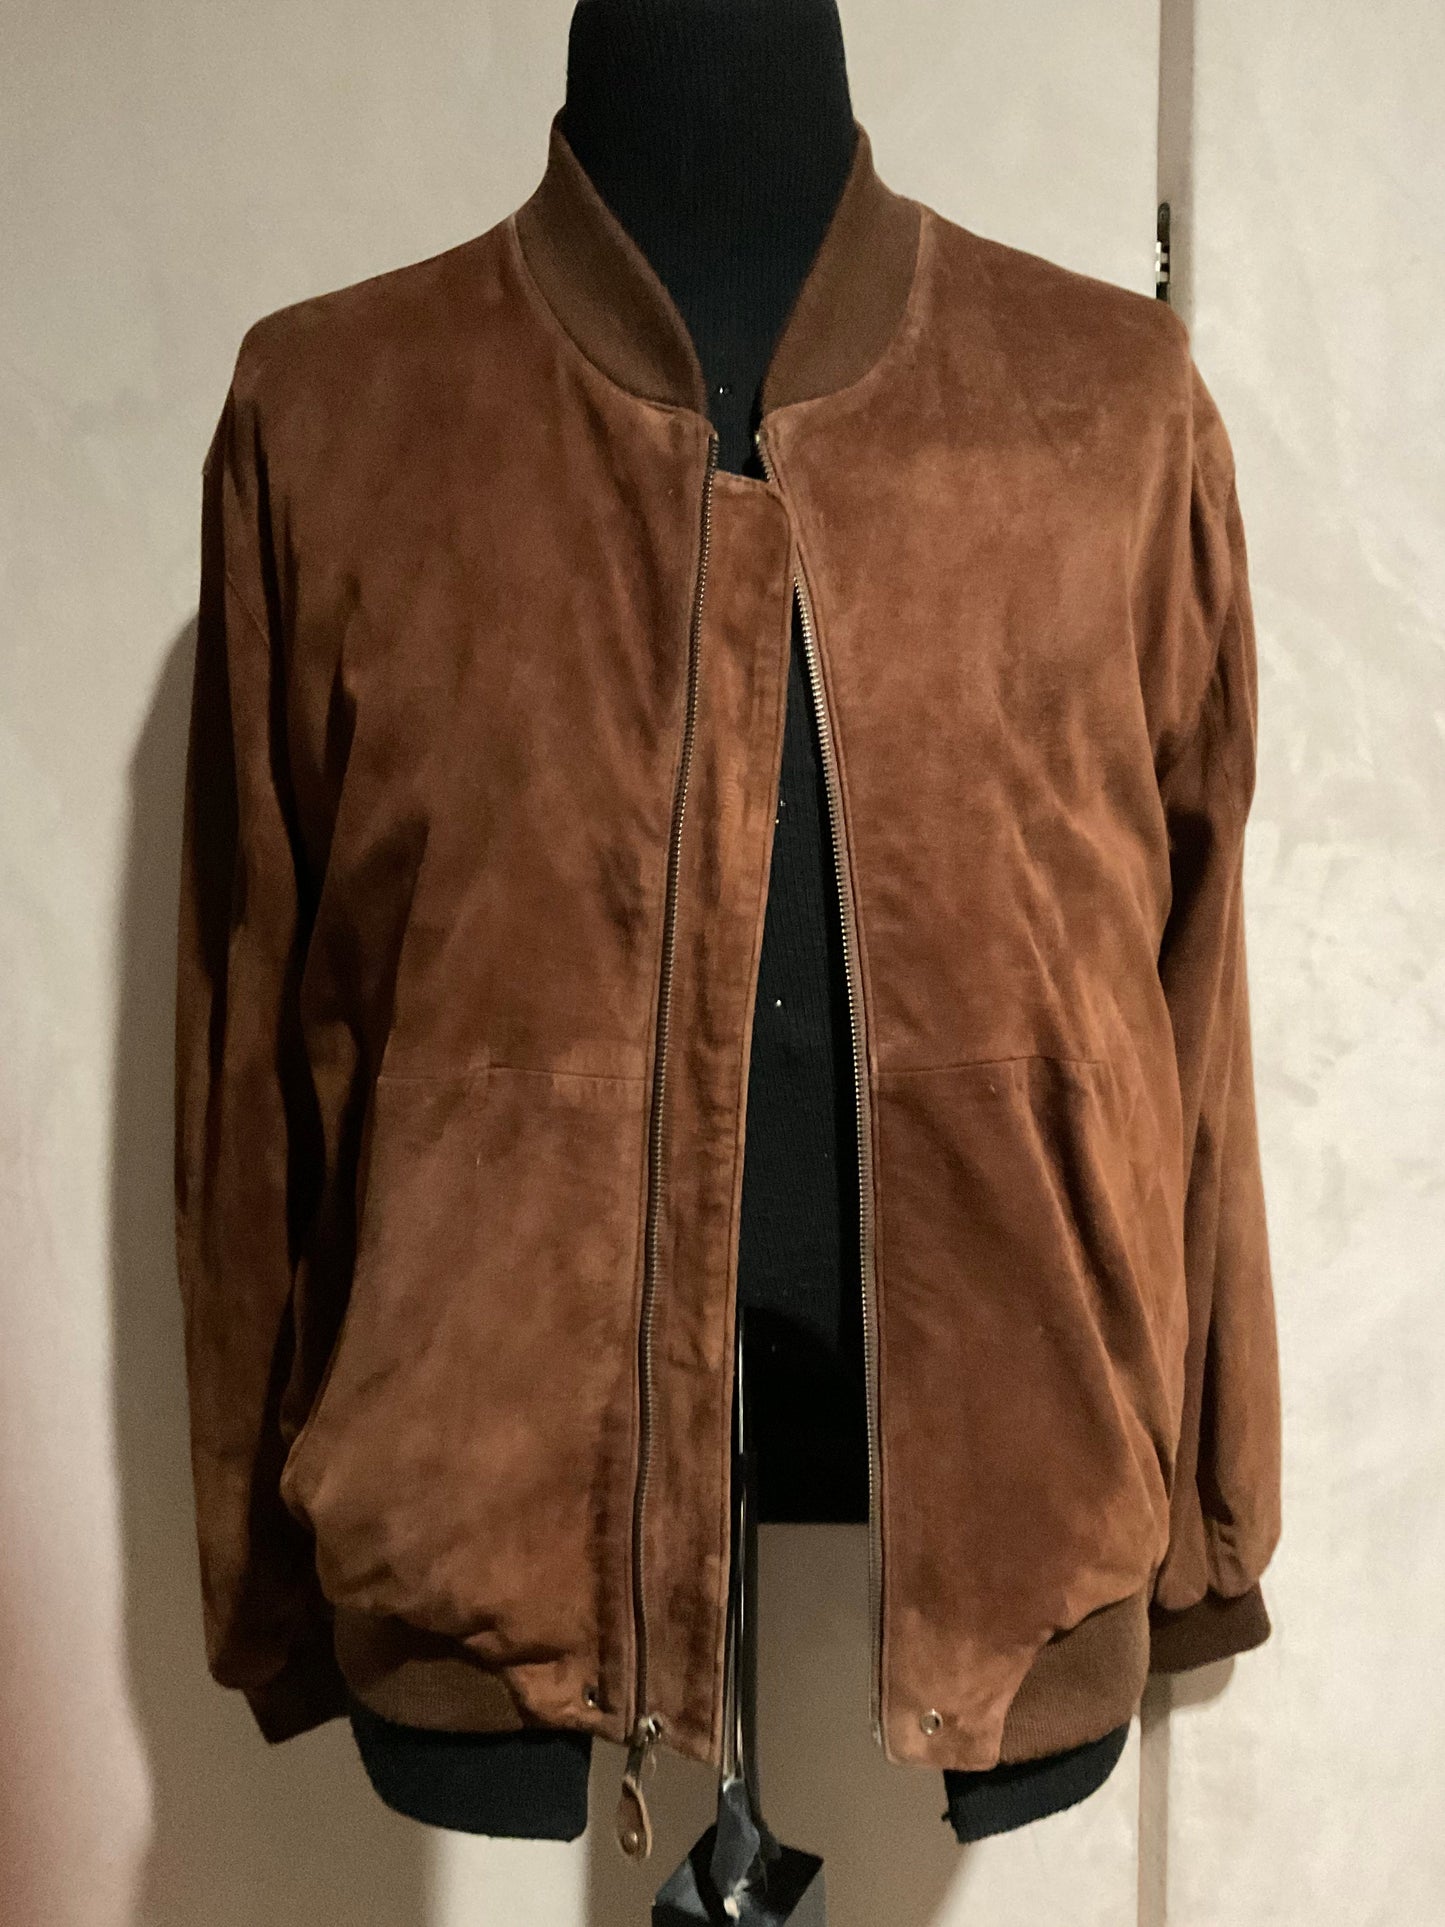 R P SUEDE JACKET / MEDIUM / BROWN RUST / NEW / CRAFTED IN USA